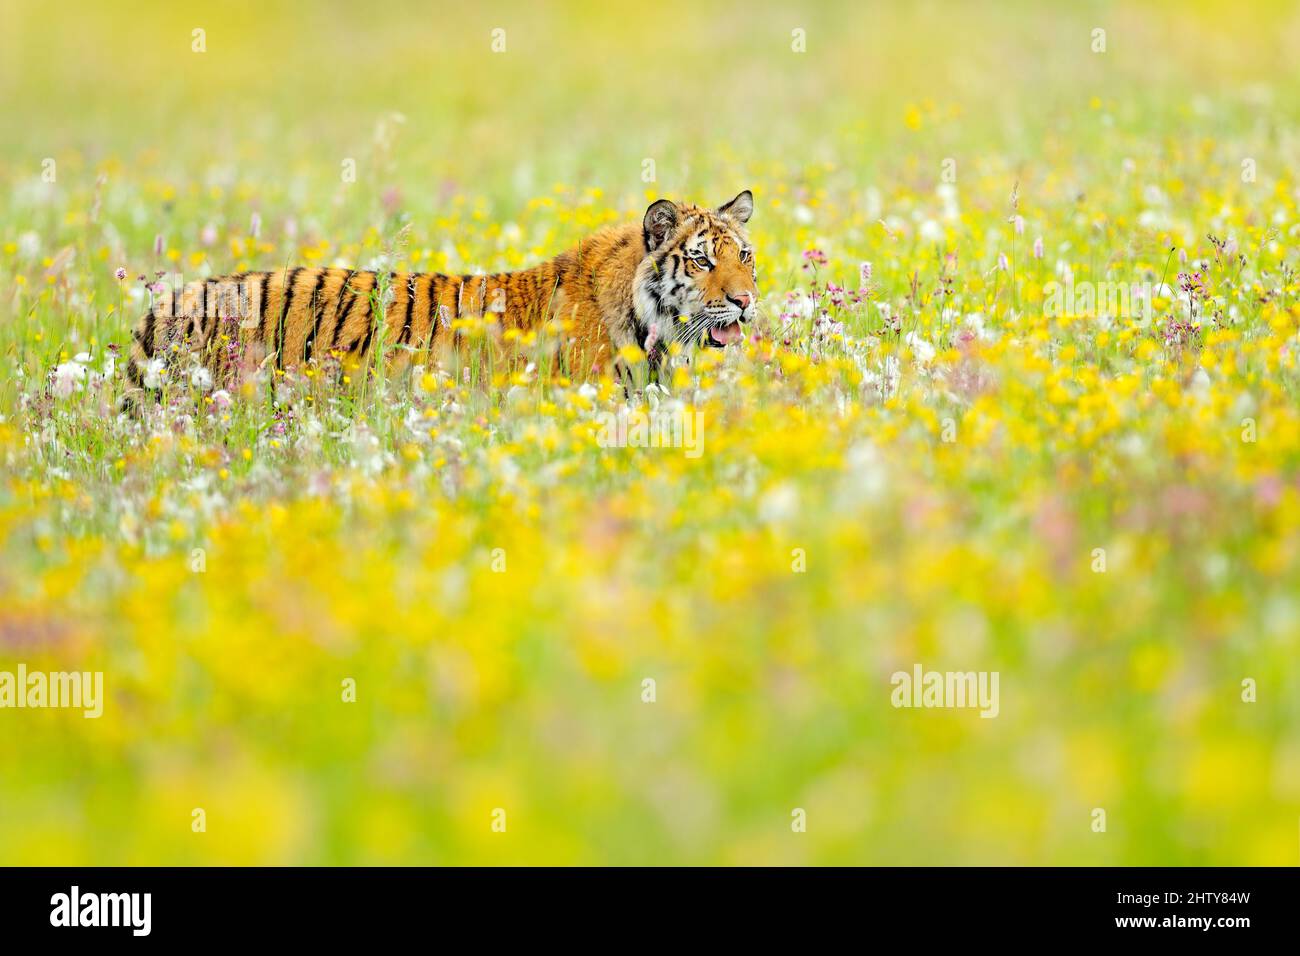 https://c8.alamy.com/comp/2HTY84W/flower-meadow-with-tiger-amur-tiger-walk-in-the-cotton-grass-flowered-meadow-with-dangerous-animal-wildlife-from-summer-russia-big-cat-in-the-natu-2HTY84W.jpg